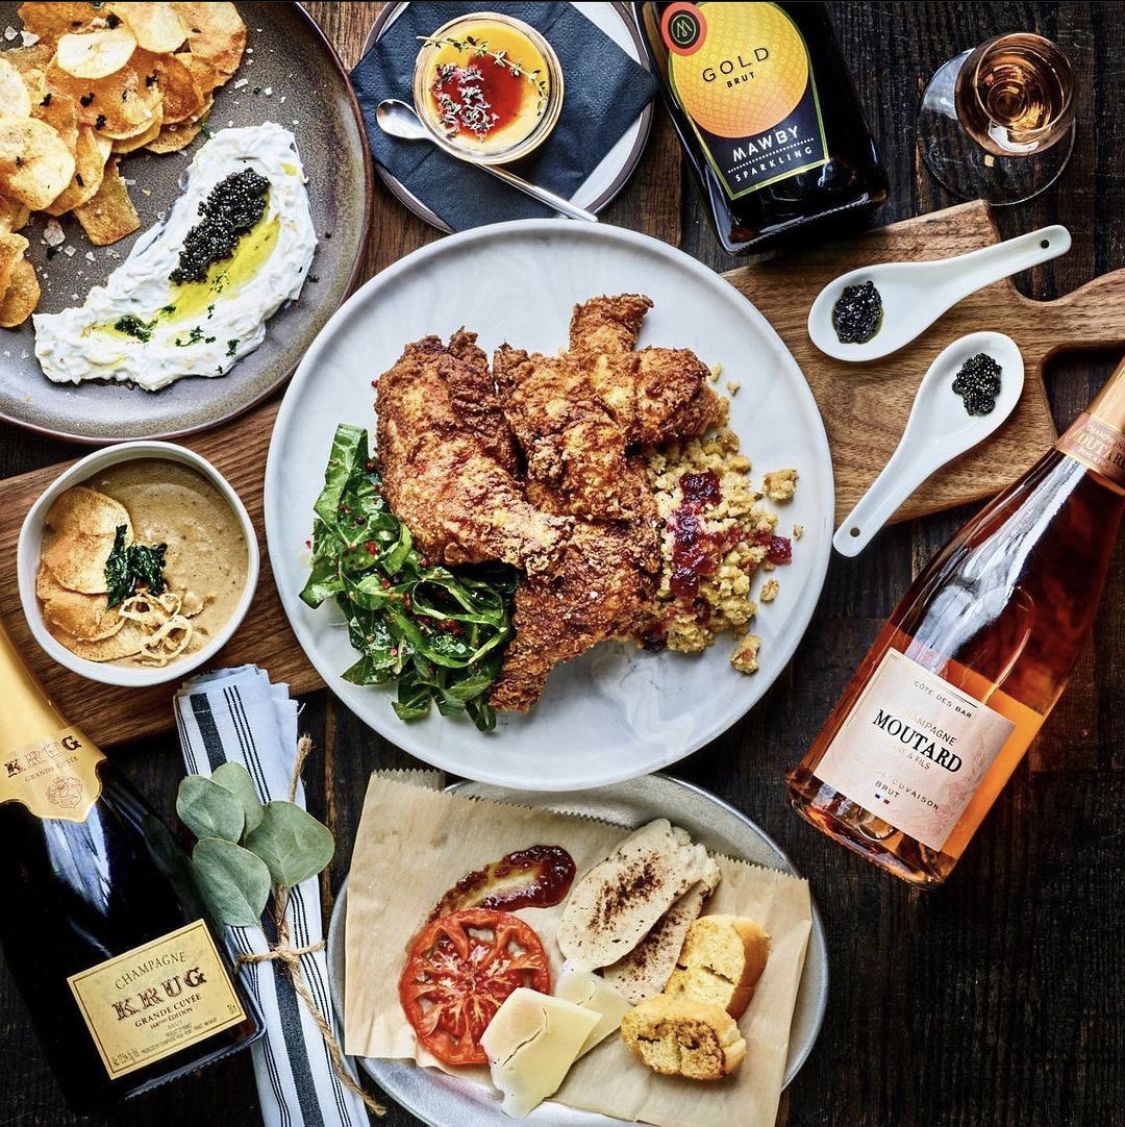 Fried chicken and caviar surrounded by bottles of liquor